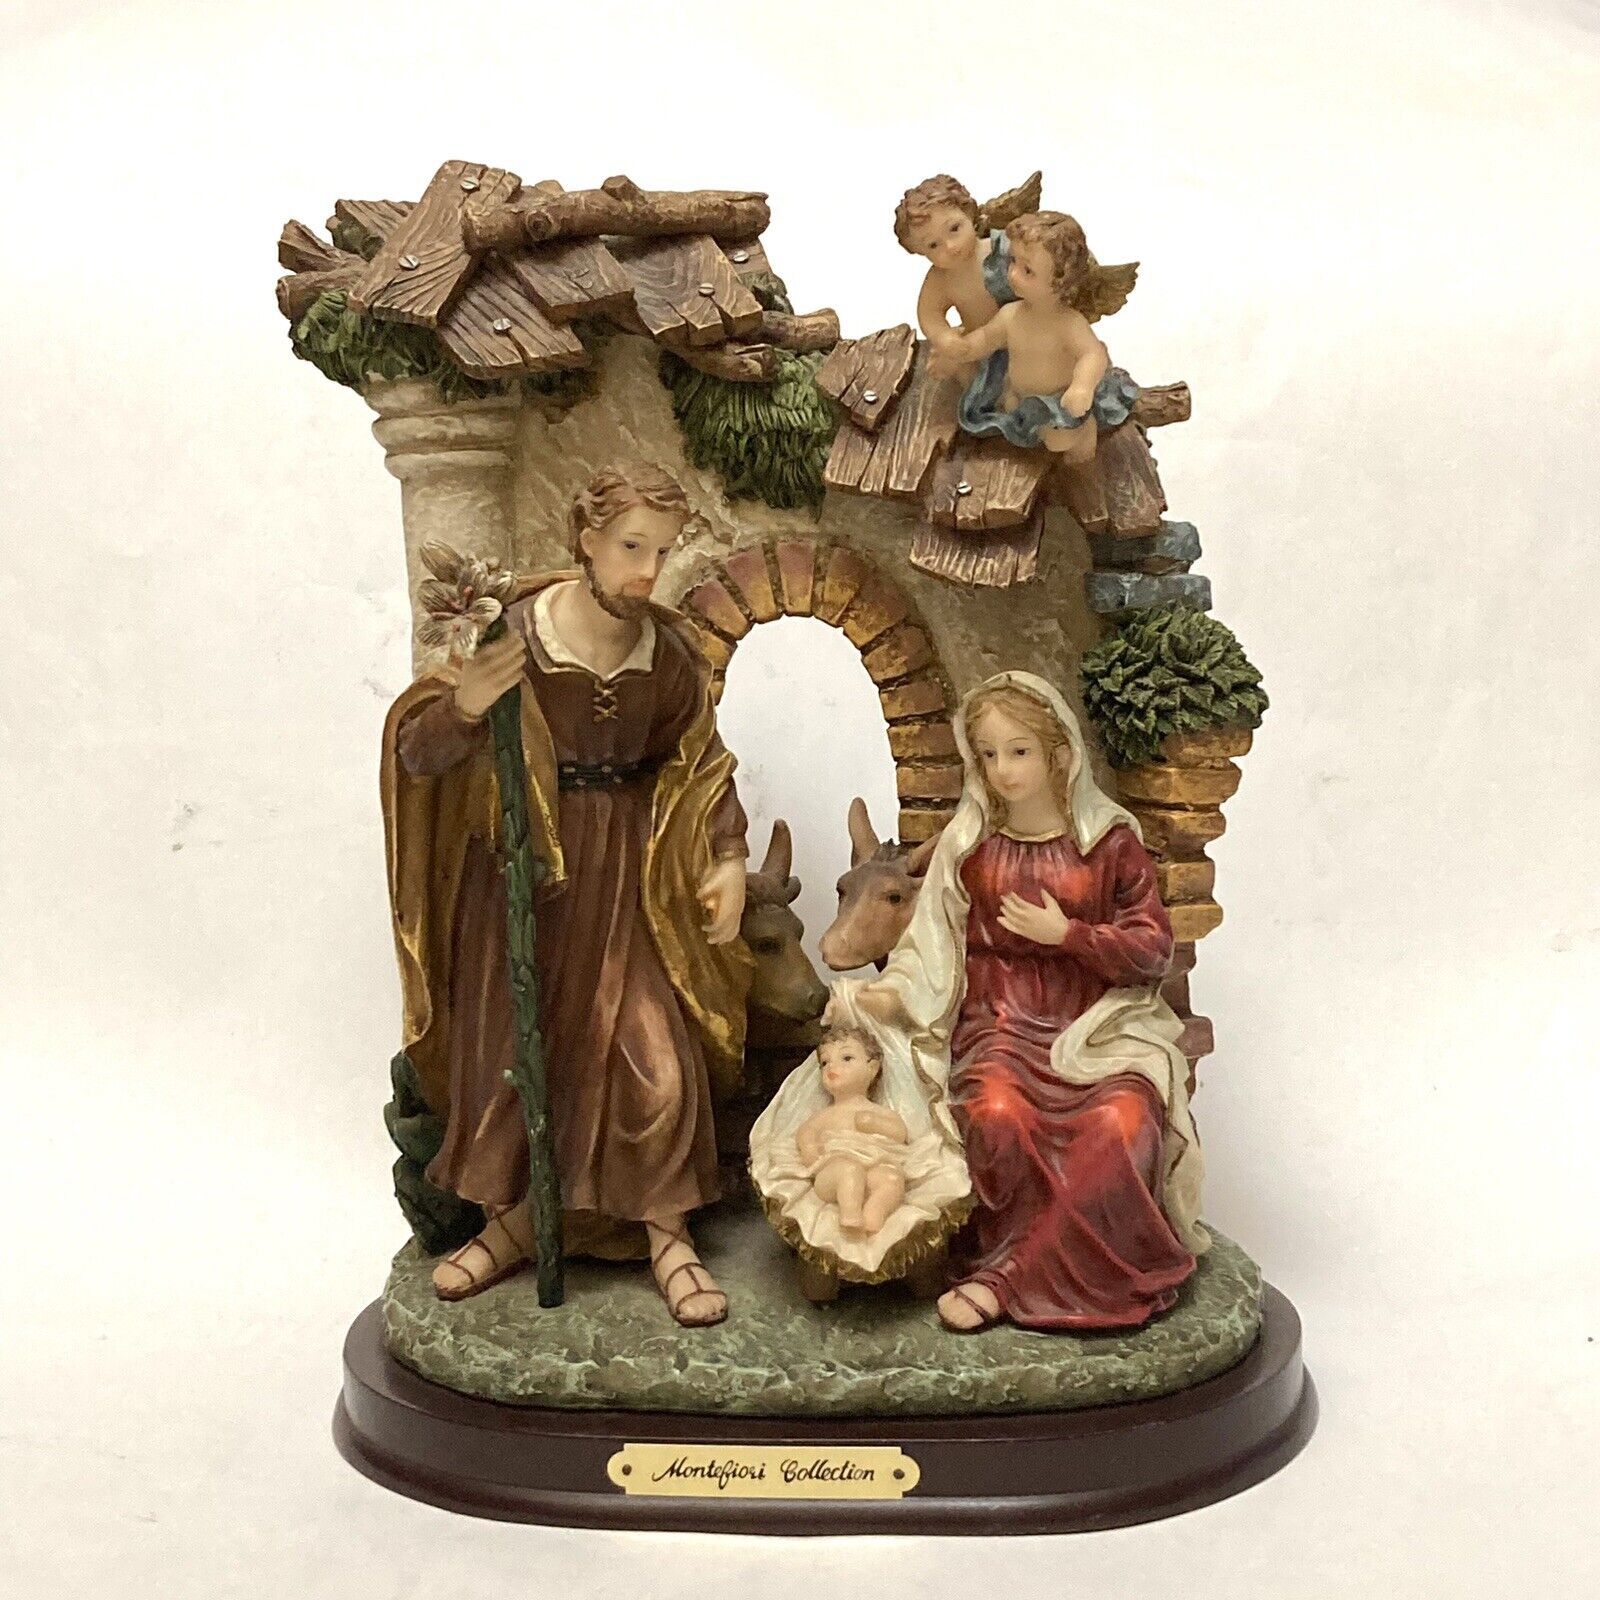 MONTEFIORI COLLECTION Nativity Figurine Italy Design Holy Family Jesus Angels